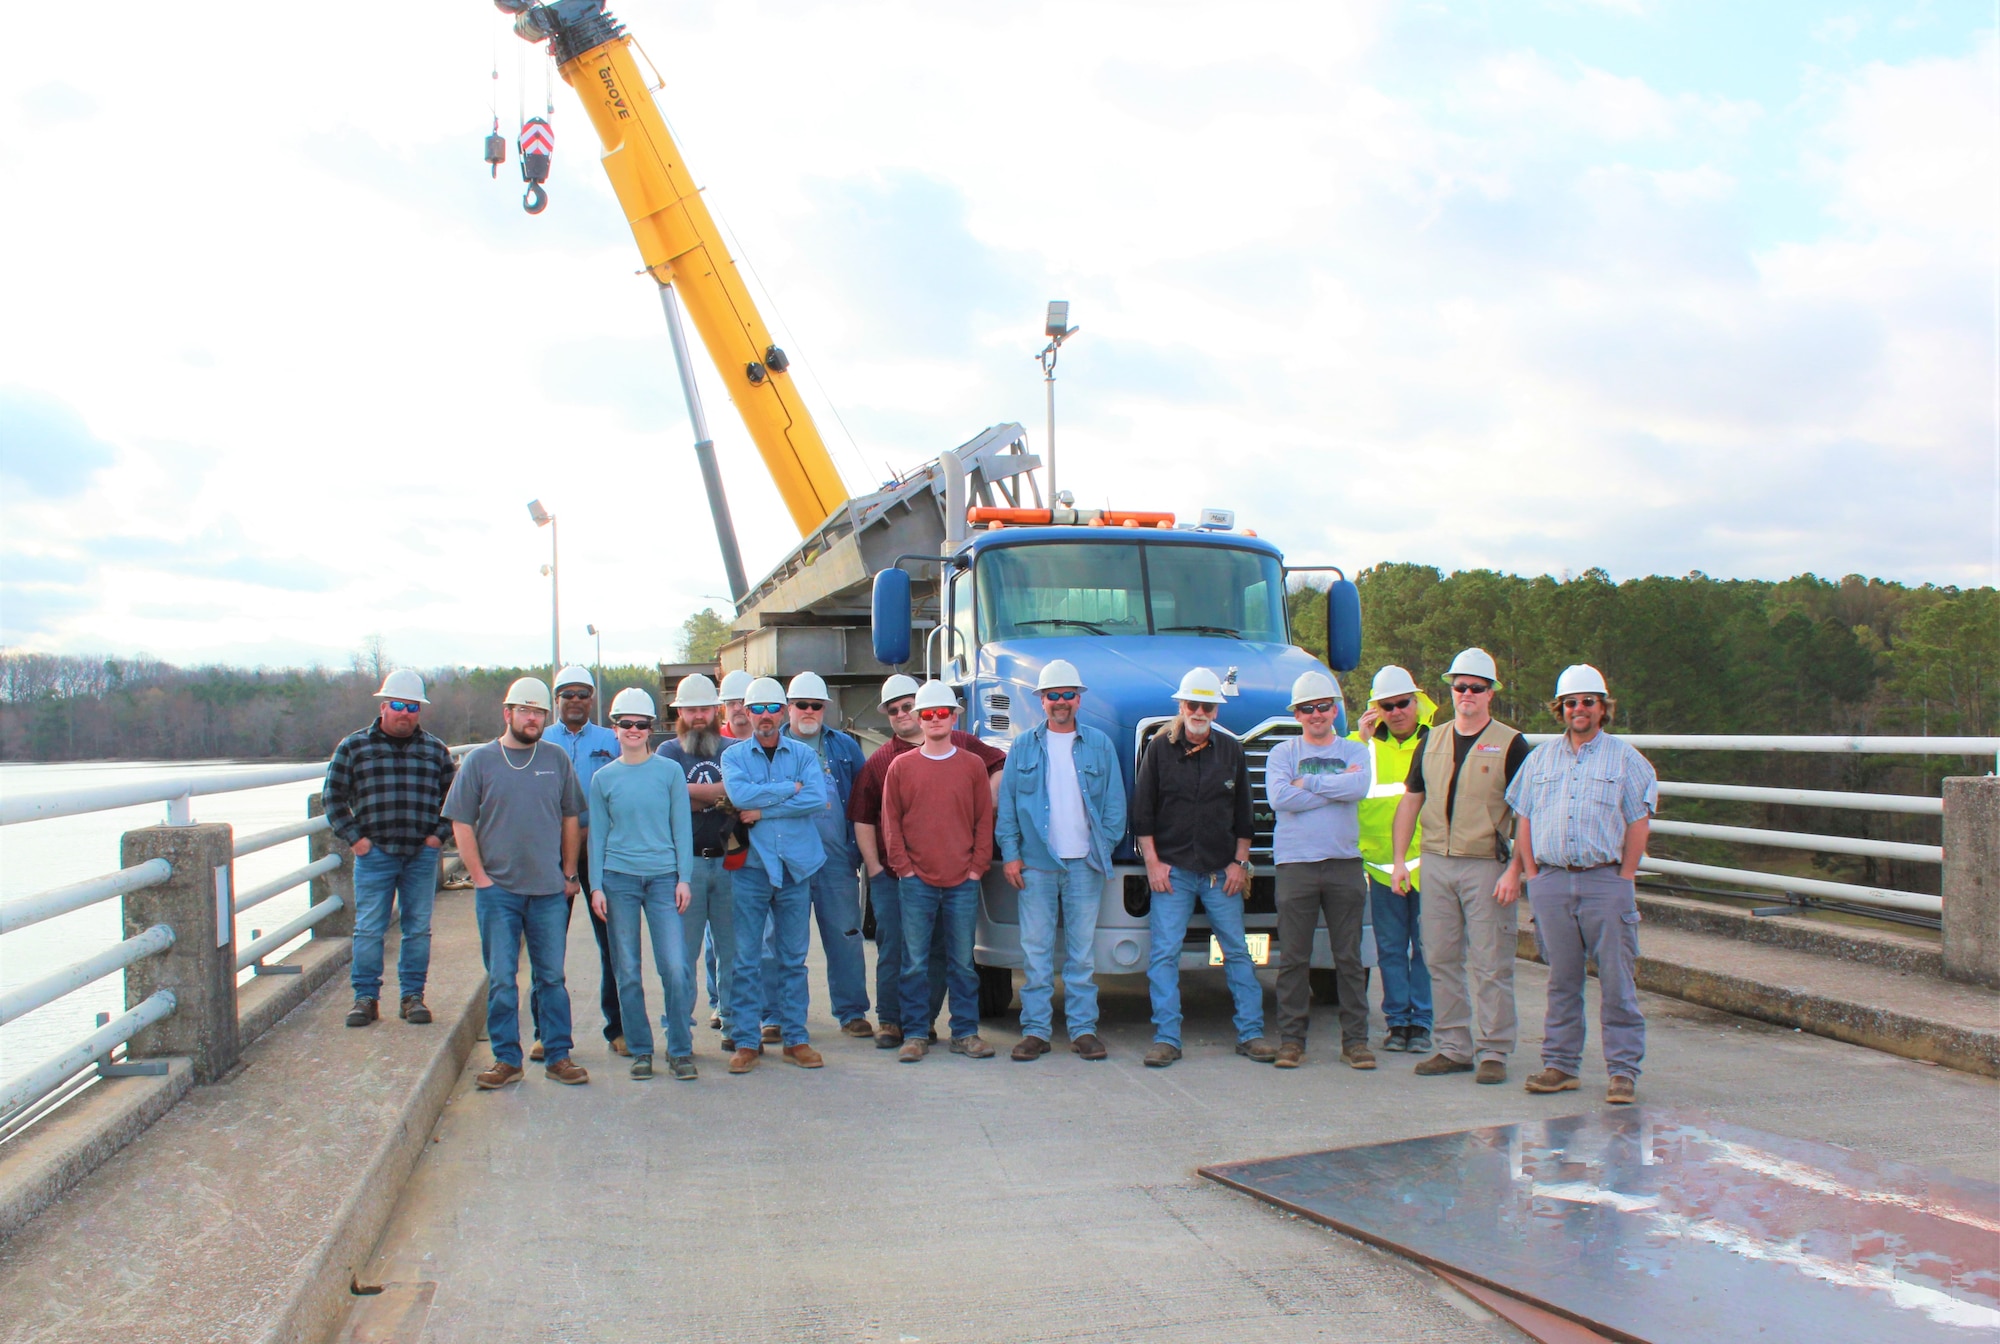 The crane and rigging crew at Arnold Air Force Base, Tenn., poses for a photo atop Elk River Dam Feb. 22, 2023. The crew recently completed a preventative maintenance project at the dam to ensure gates and other equipment remain in good working order. This work is performed each winter to prevent disturbances to the gray bat population residing at the dam, as the bats migrate to caves during the winter months. (U.S. Air Force photo)